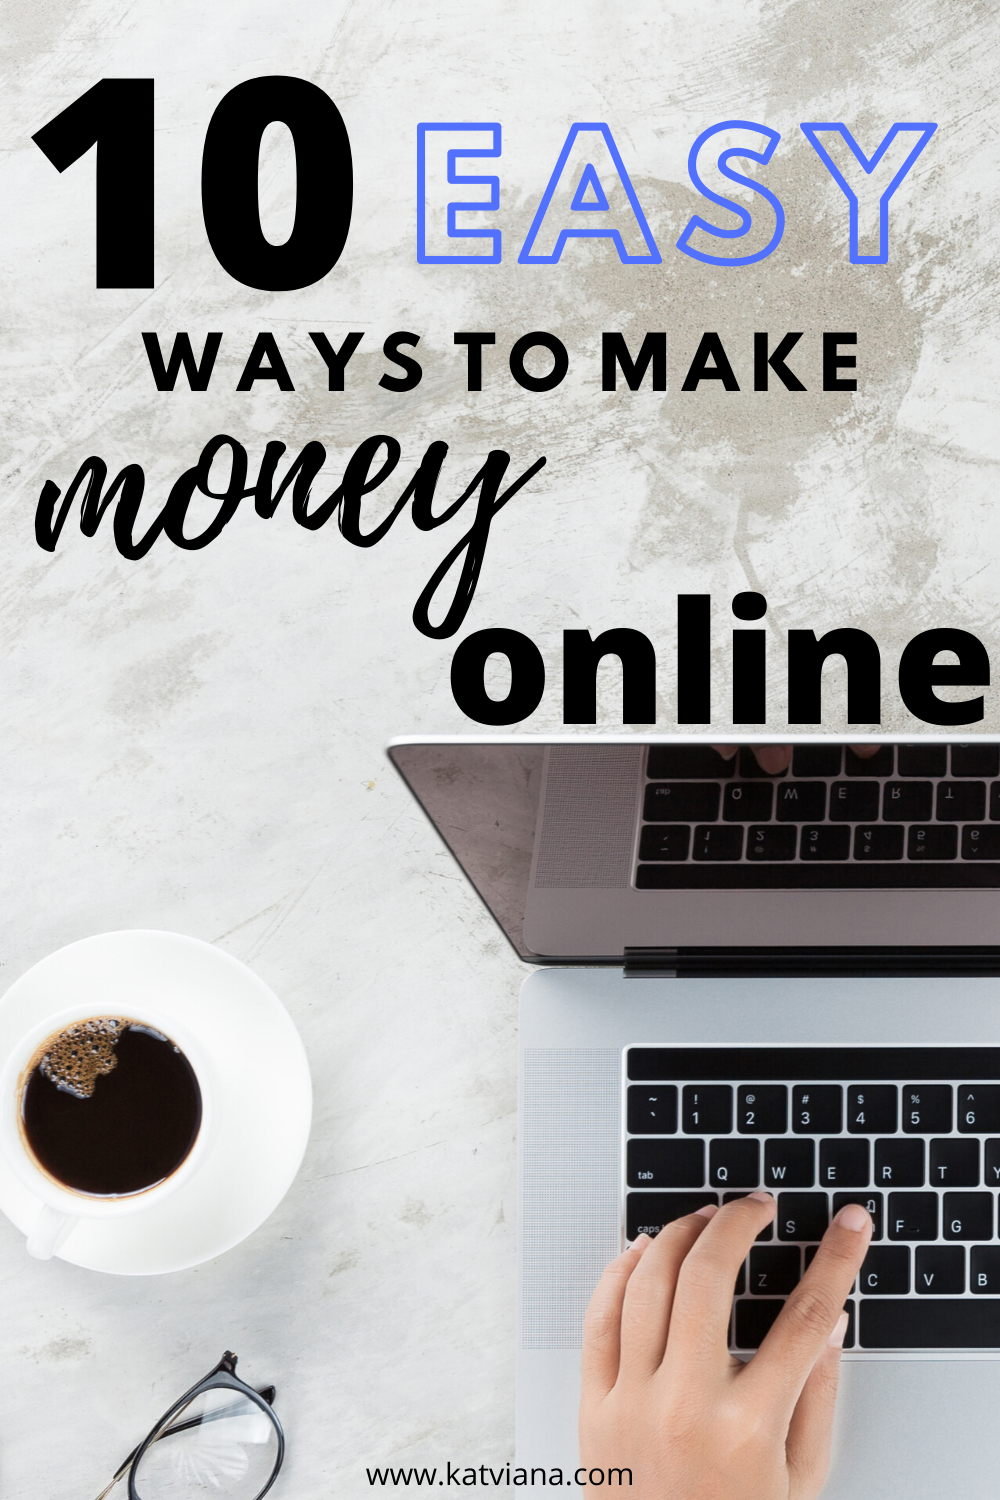 10 easy ways to make money online - how I make $100/day in just my spare time